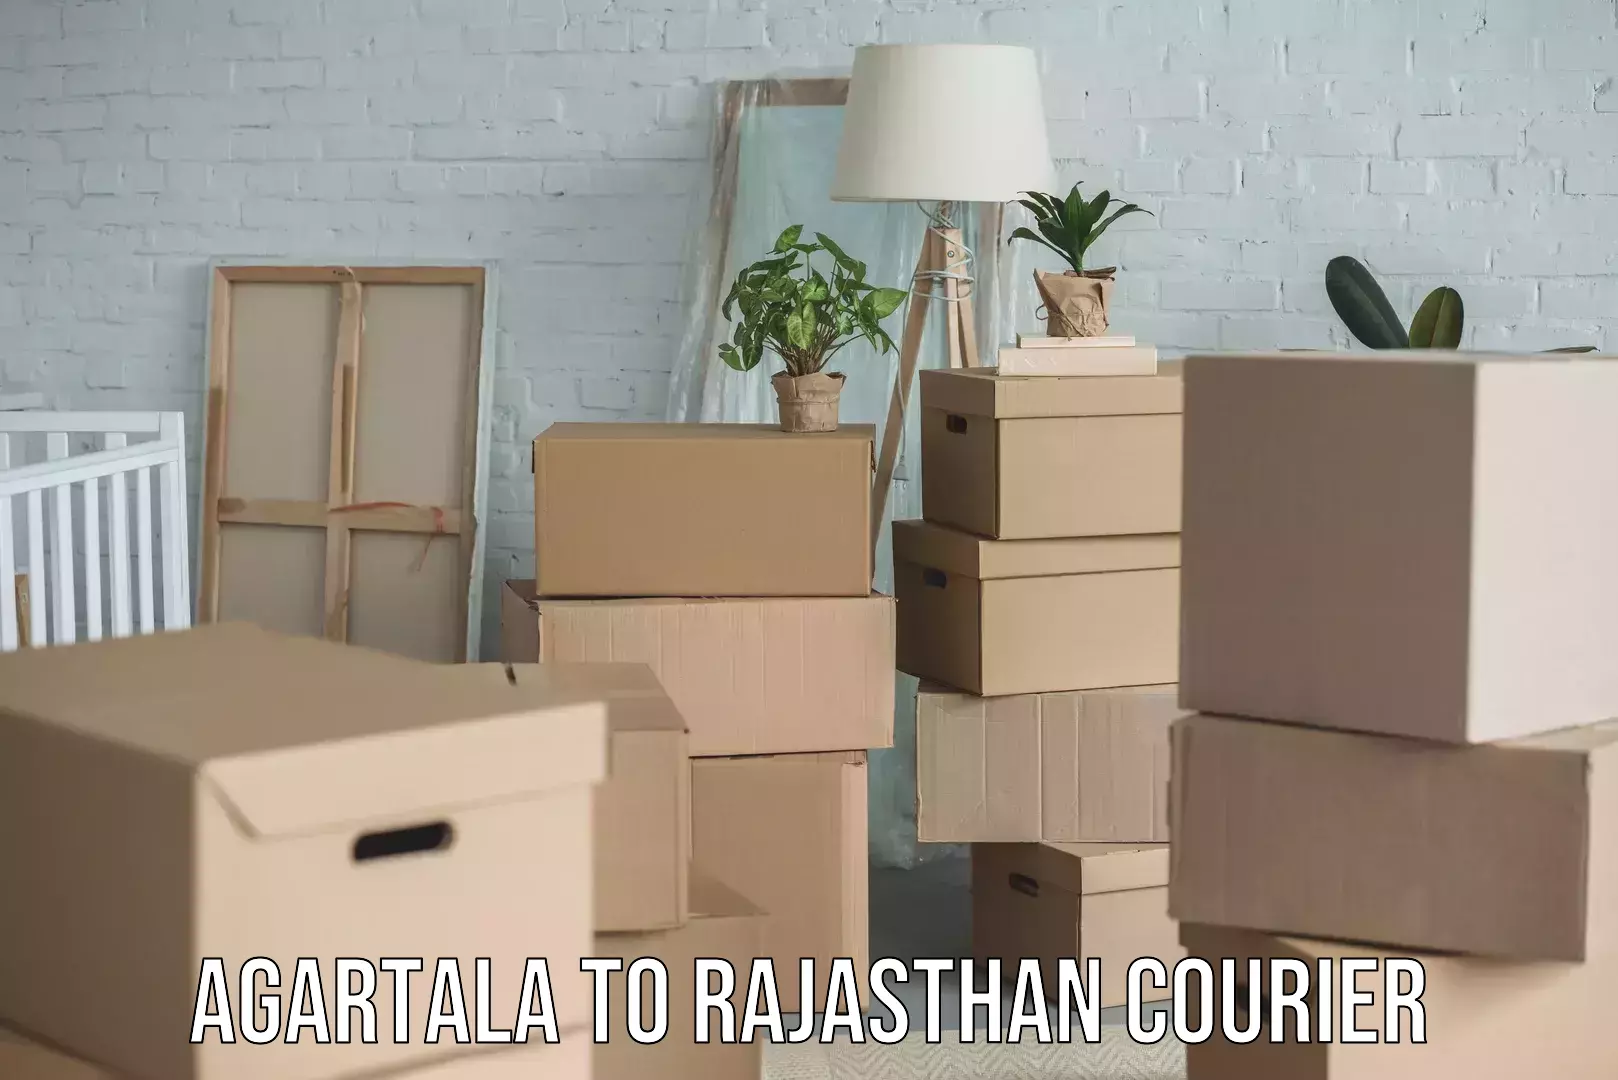 Subscription-based courier Agartala to Rajasthan